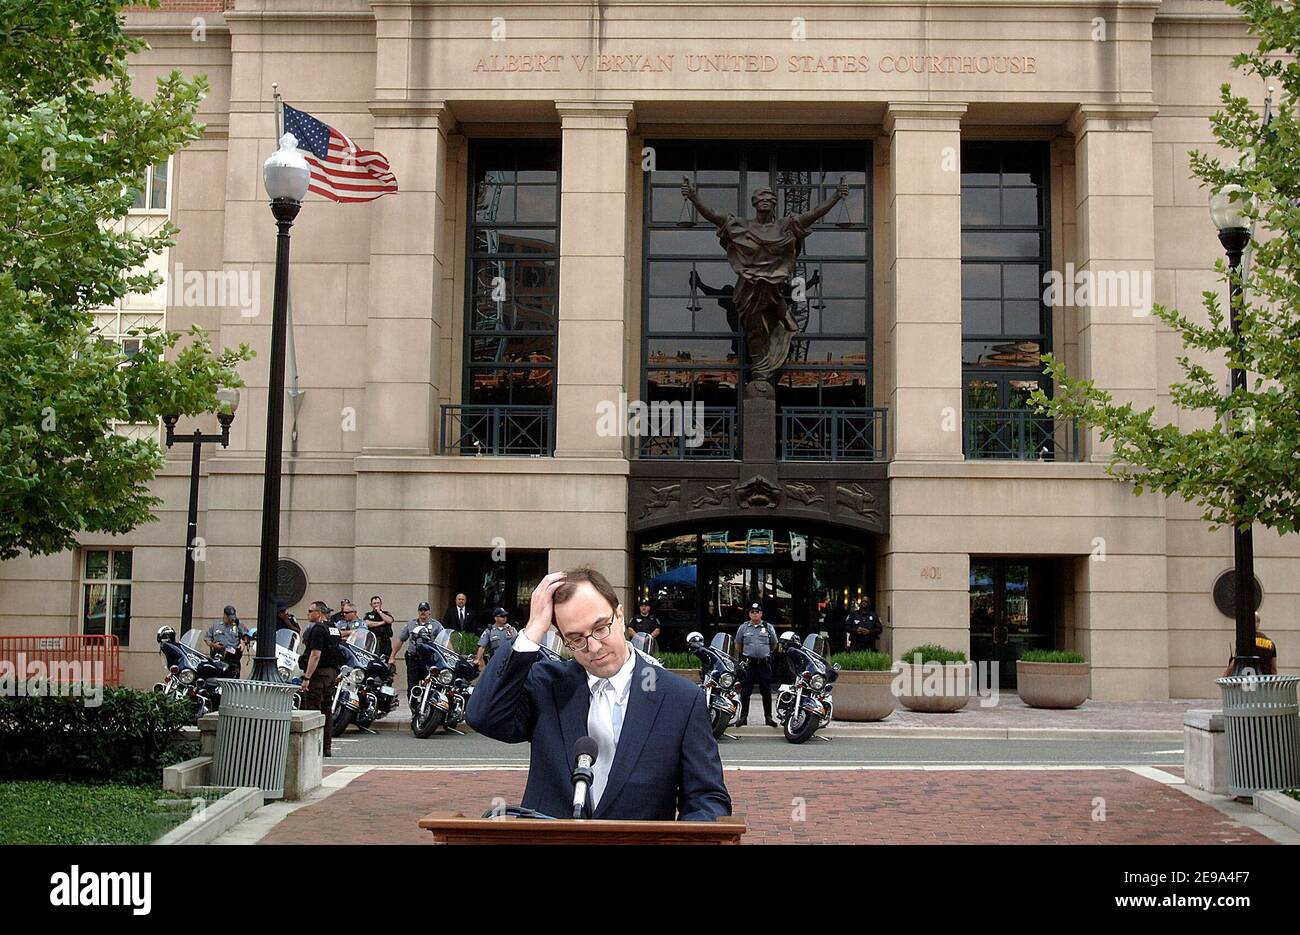 Court Public Information Officer Ed Adams announces that the jury sentenced self-professed al-Qaida terrorist Zacarias Moussaoui to life in prison May 3, 2006 in front of the federal court building in Alexandria, Virginia. Adams read all the counts against Moussaoui and announced the jury's decision on each. Photo by Olivier Douliery/ABACAPRESS.COM Stock Photo